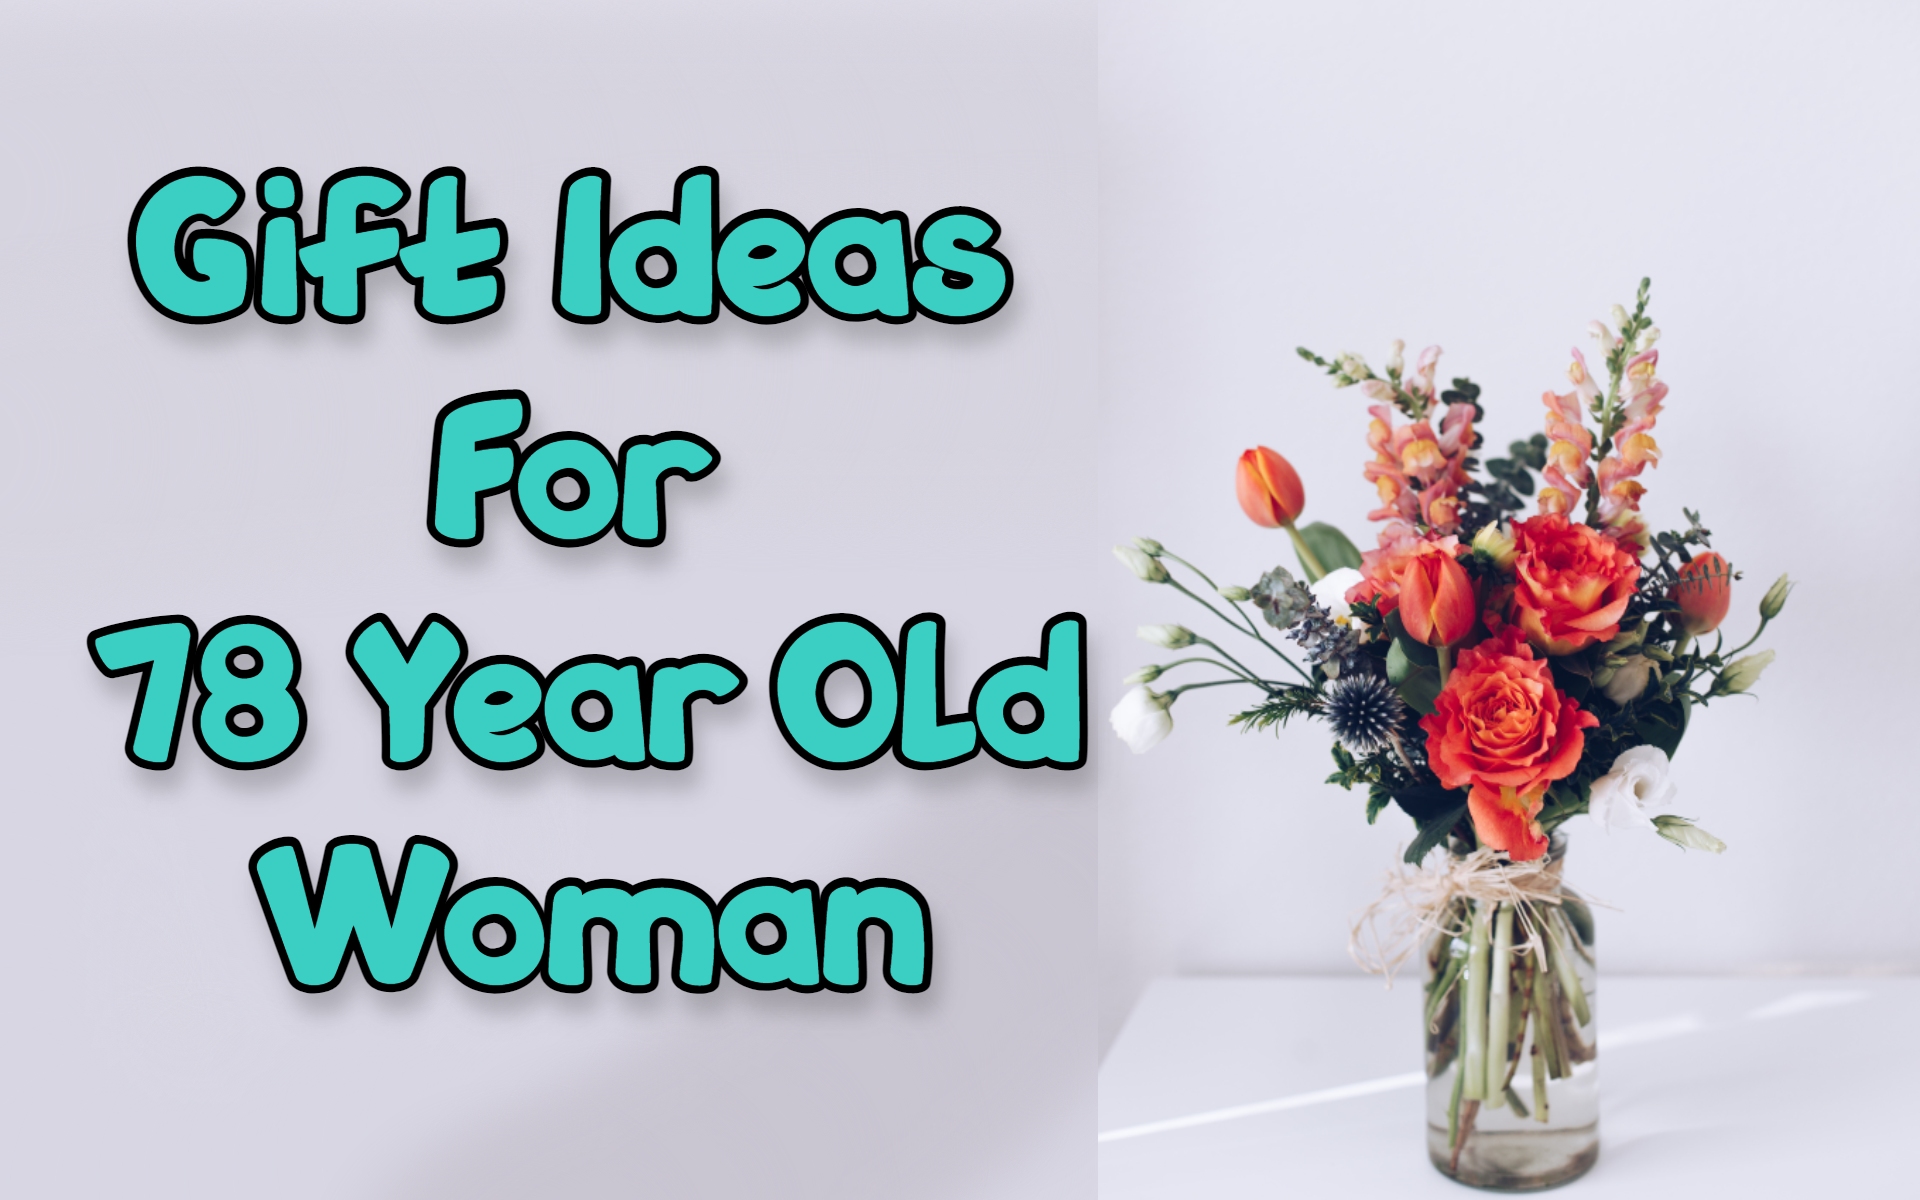 Cover image of gift ideas for 78-year-old woman by Giftsedge